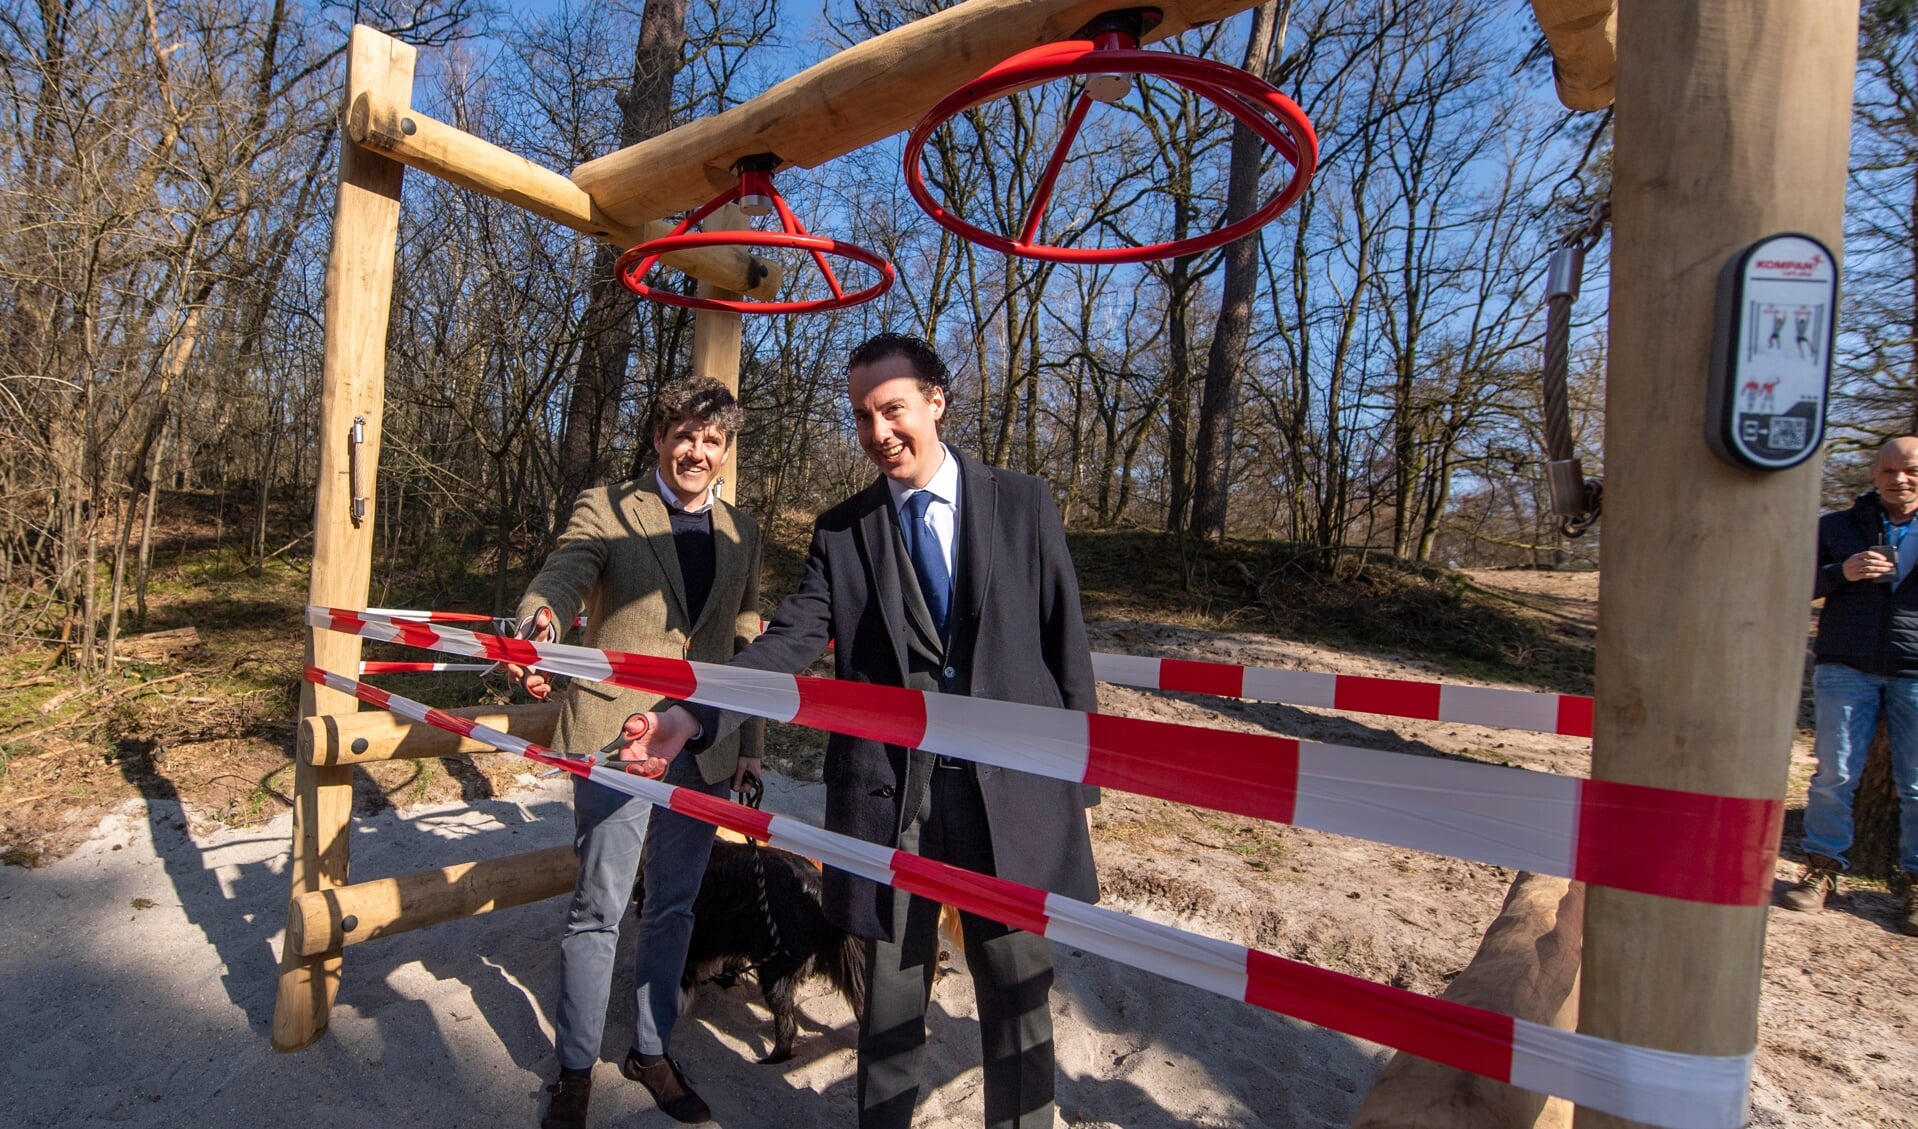 Wethouder Maathuis opent het Obstacle Parcours. (Foto: Lenneke Lingmont)